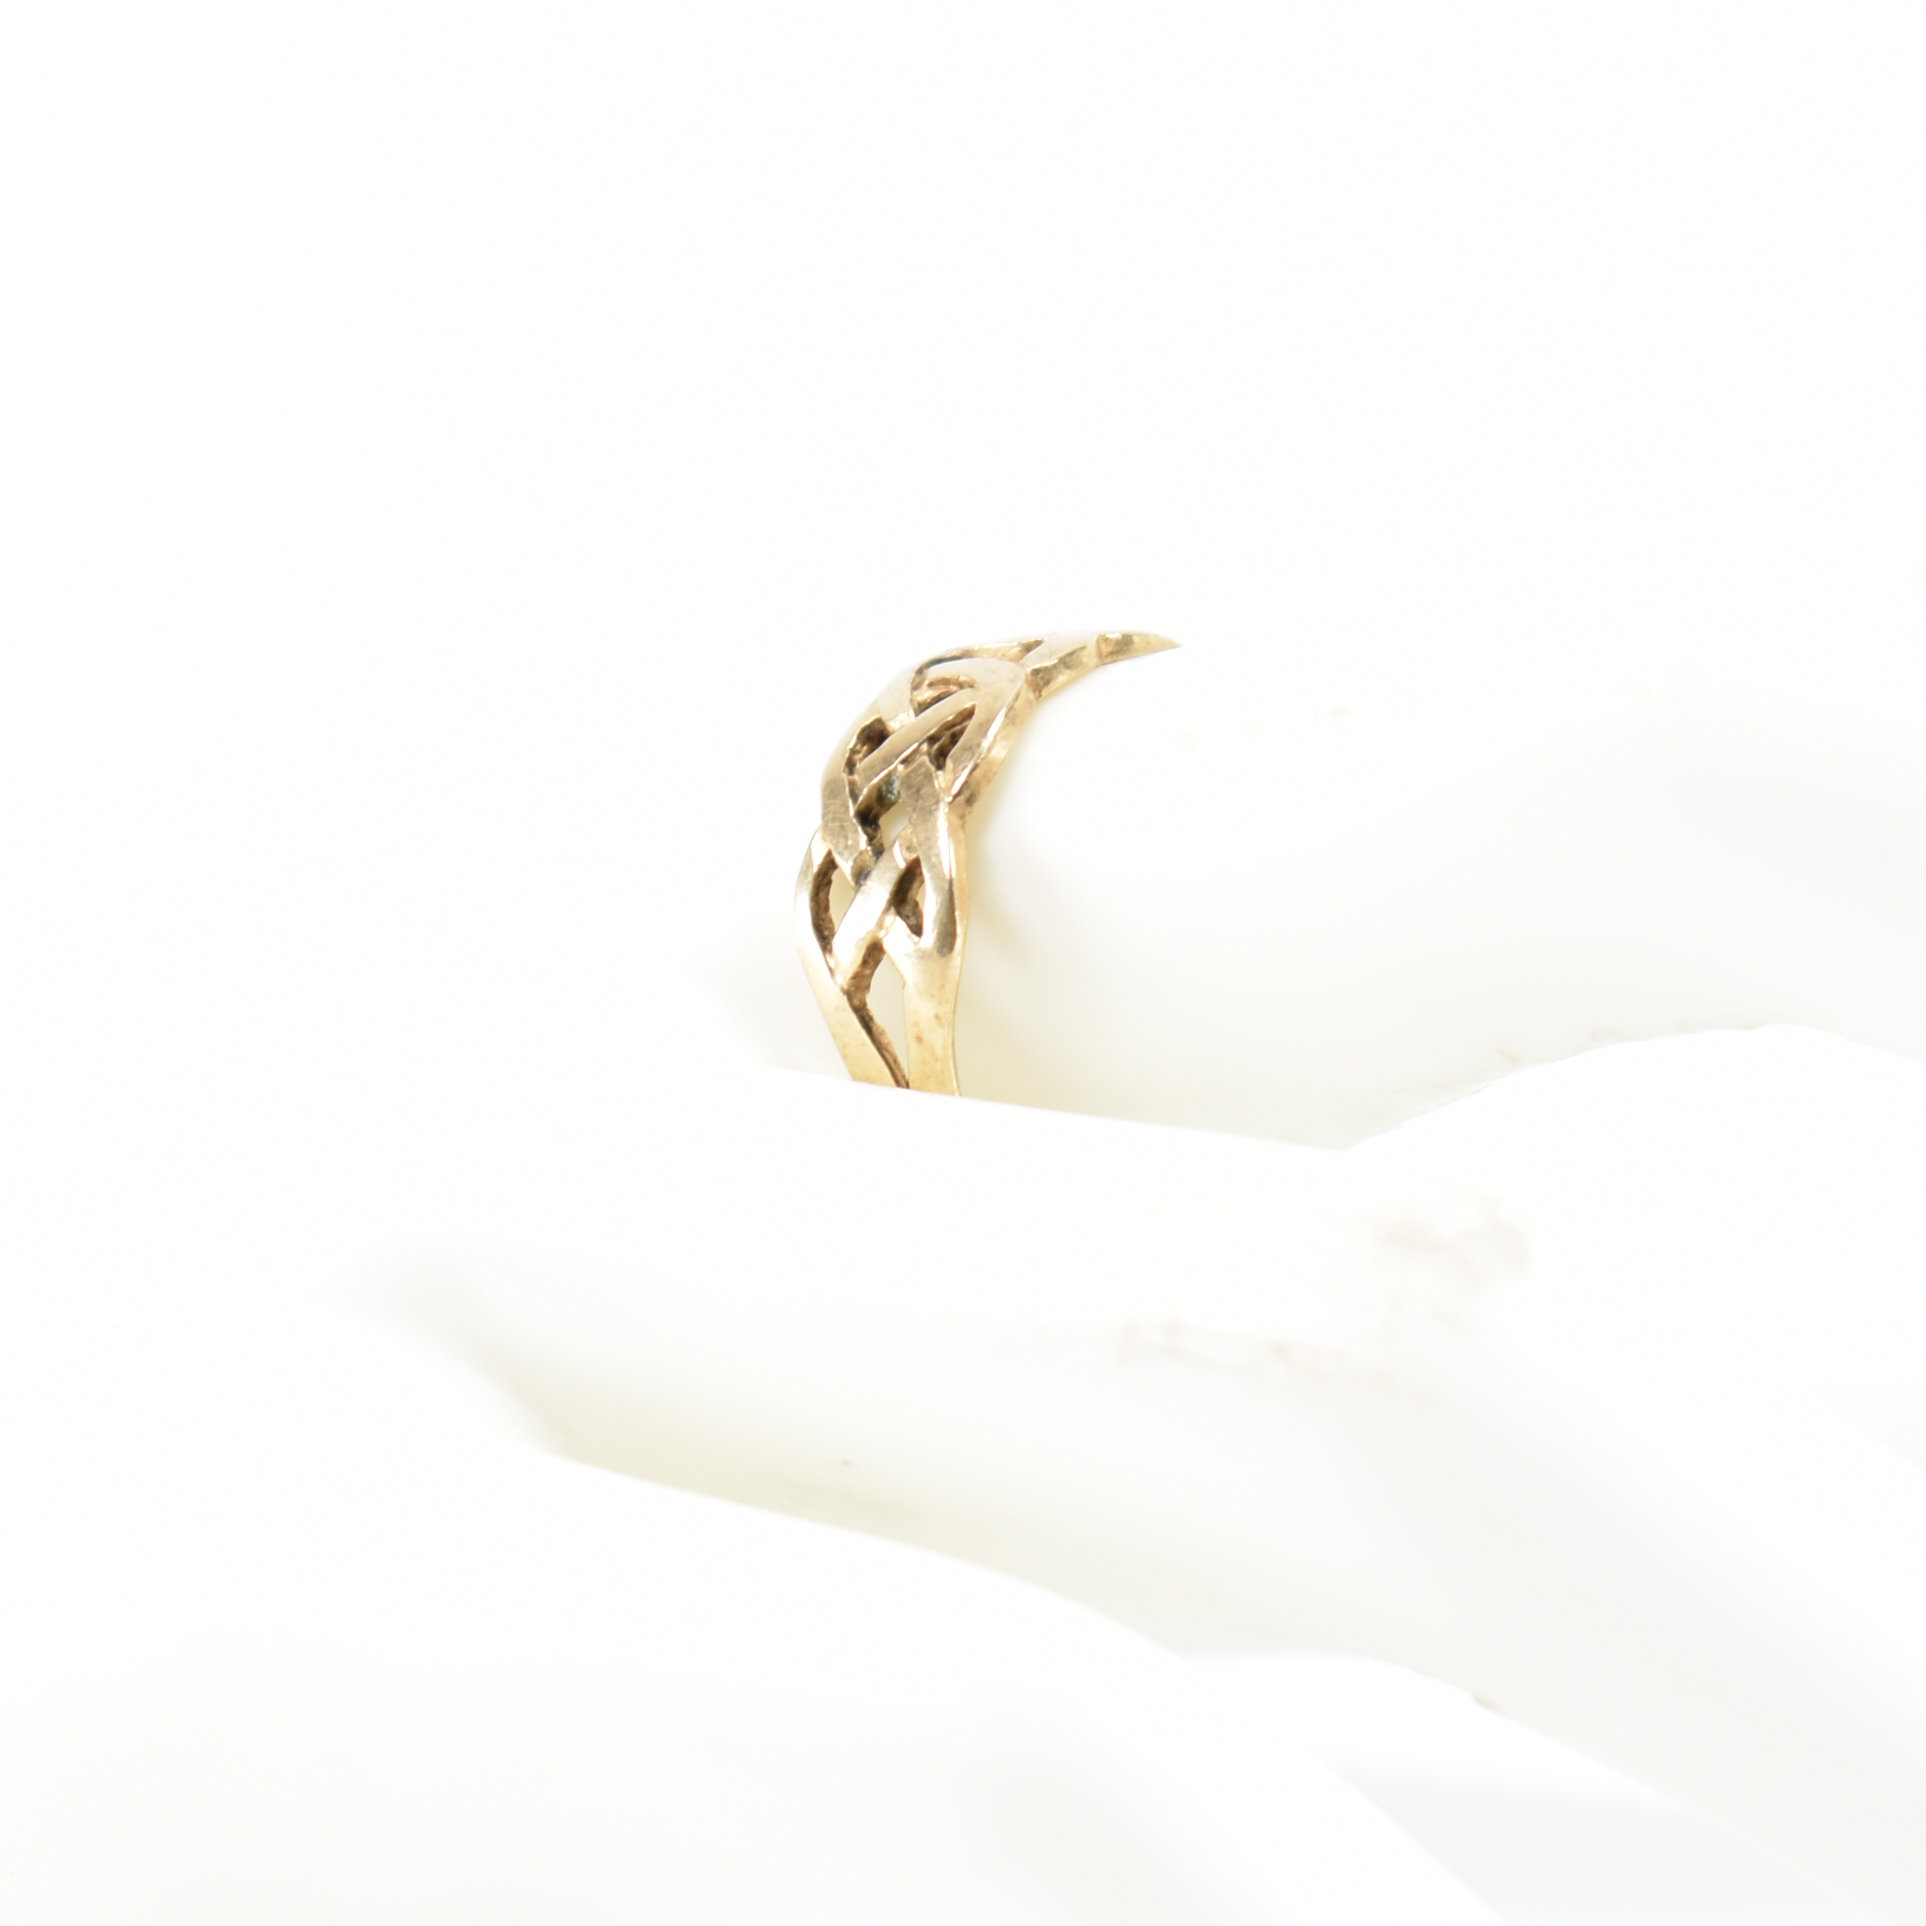 HALLMARKED 9CT GOLD CELTIC KNOT RING - Image 8 of 8